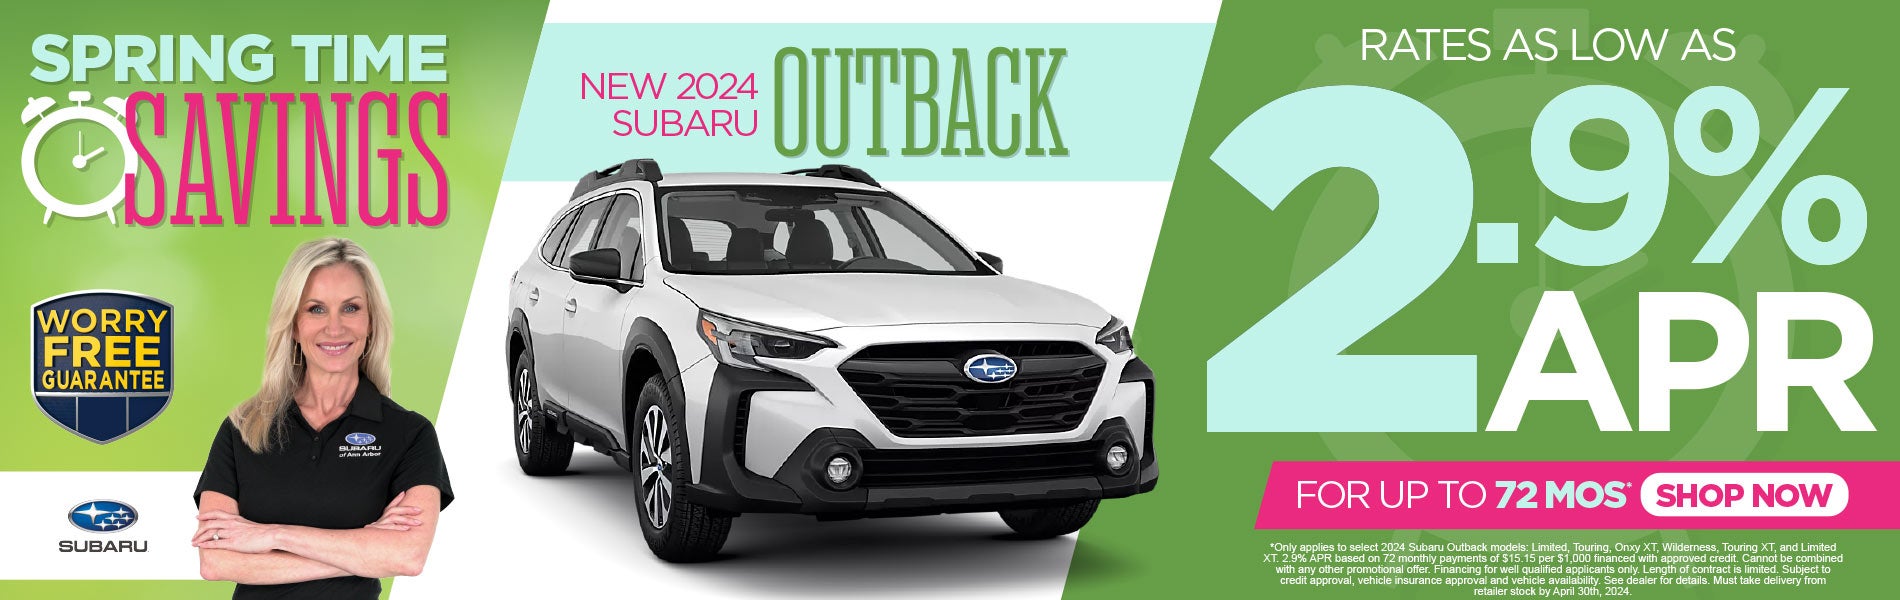 New 2024 Subaru Outback rates as low as 2.9%